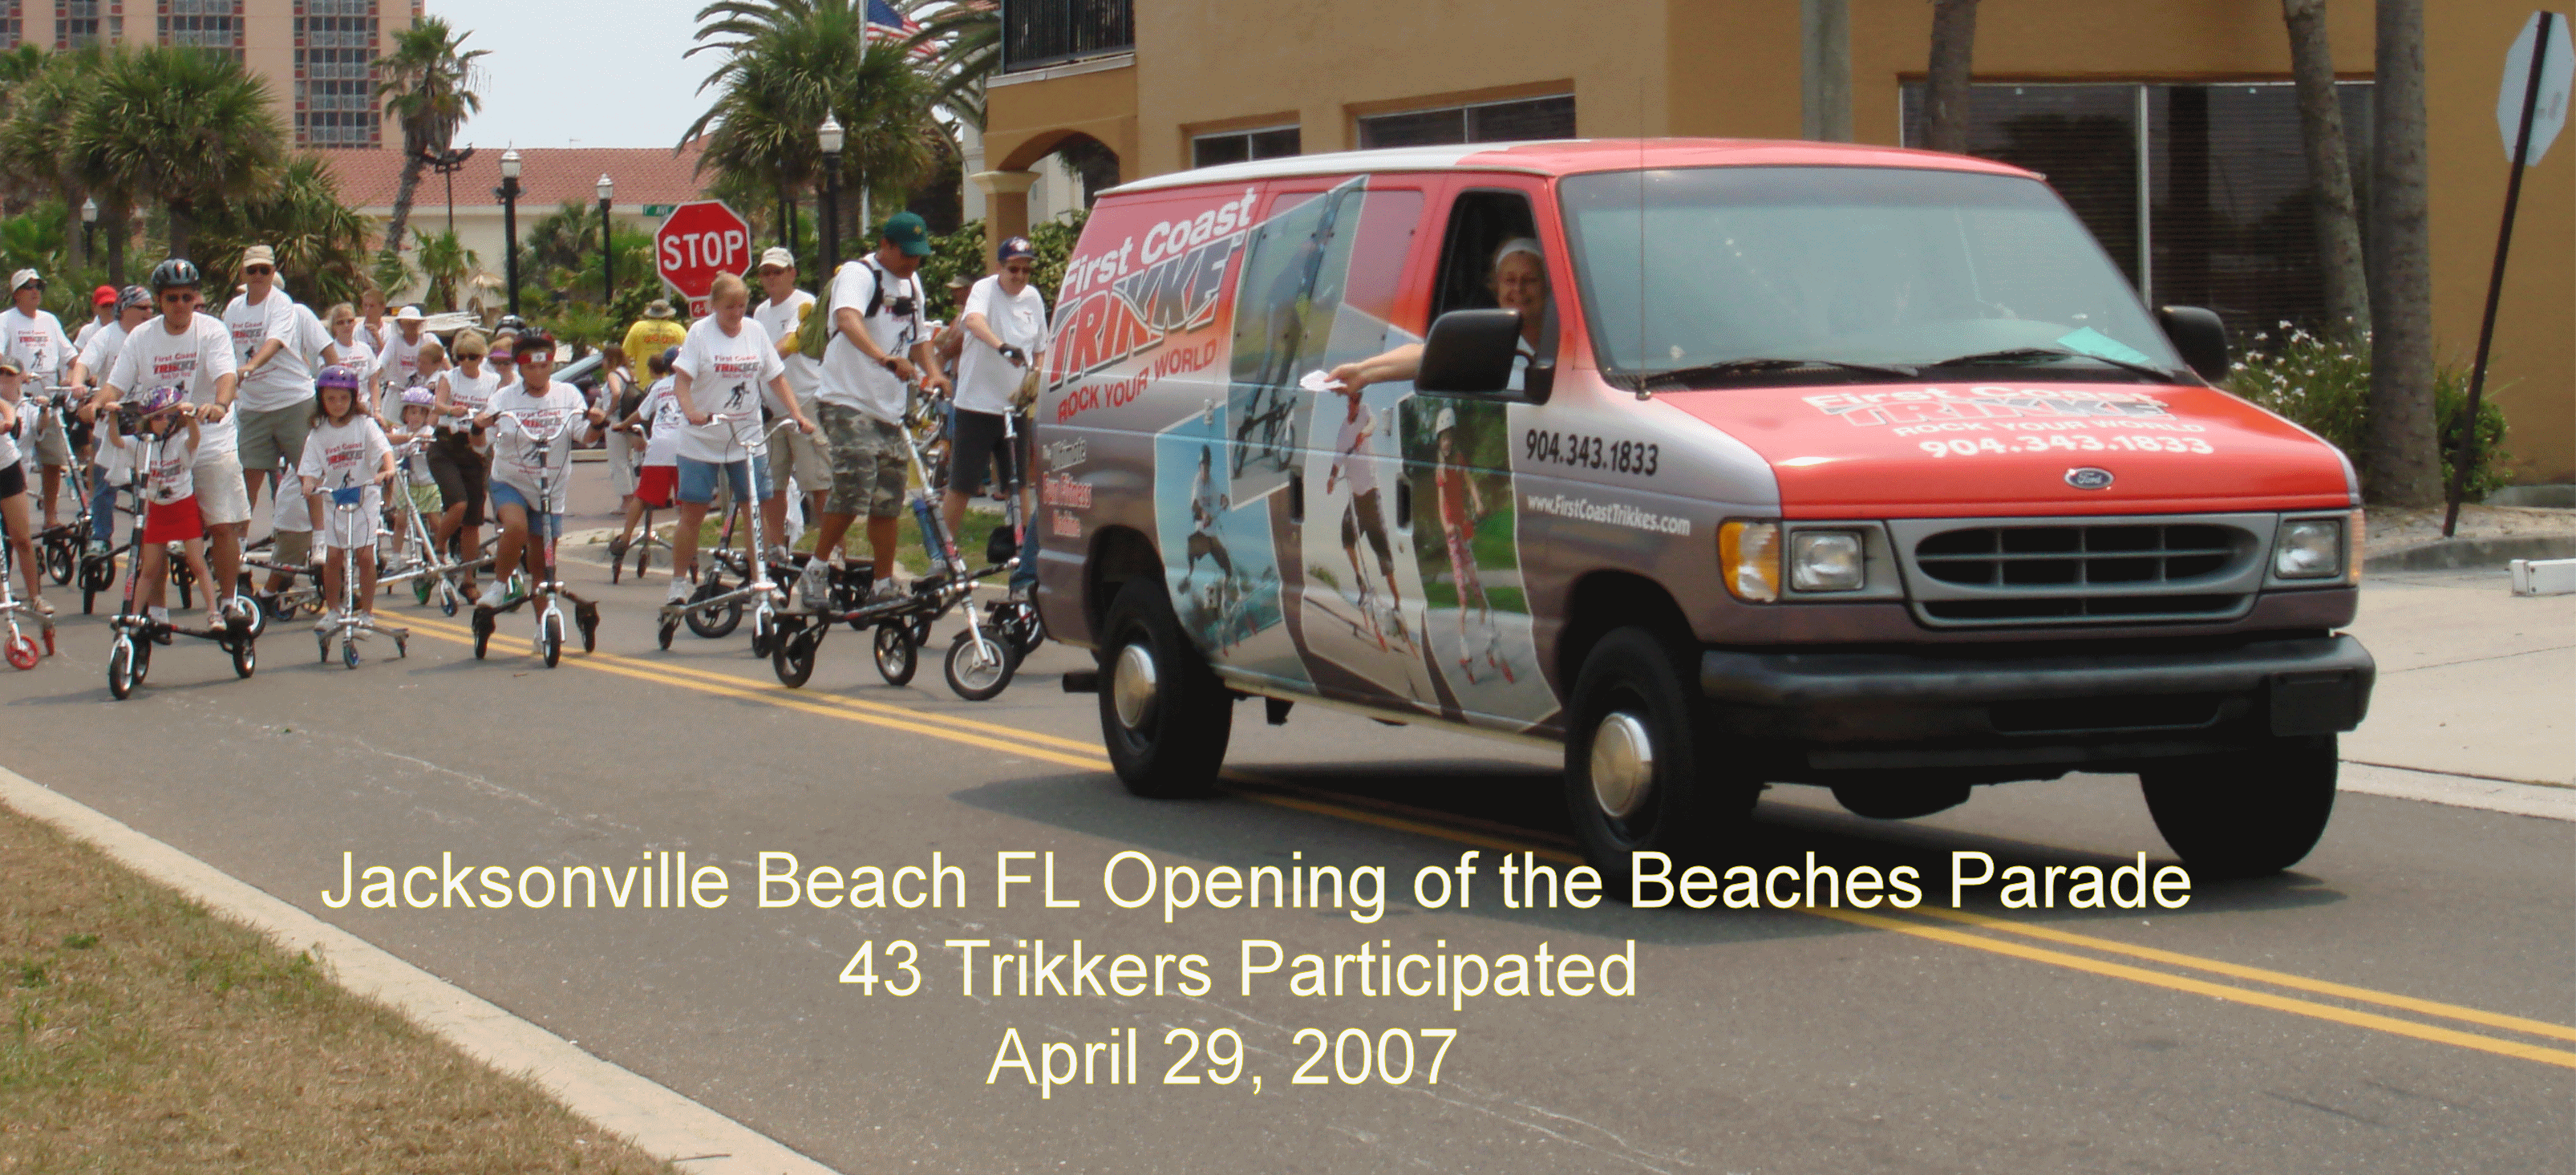 Opening of the Beaches Parade and Ride Jacksonville FL